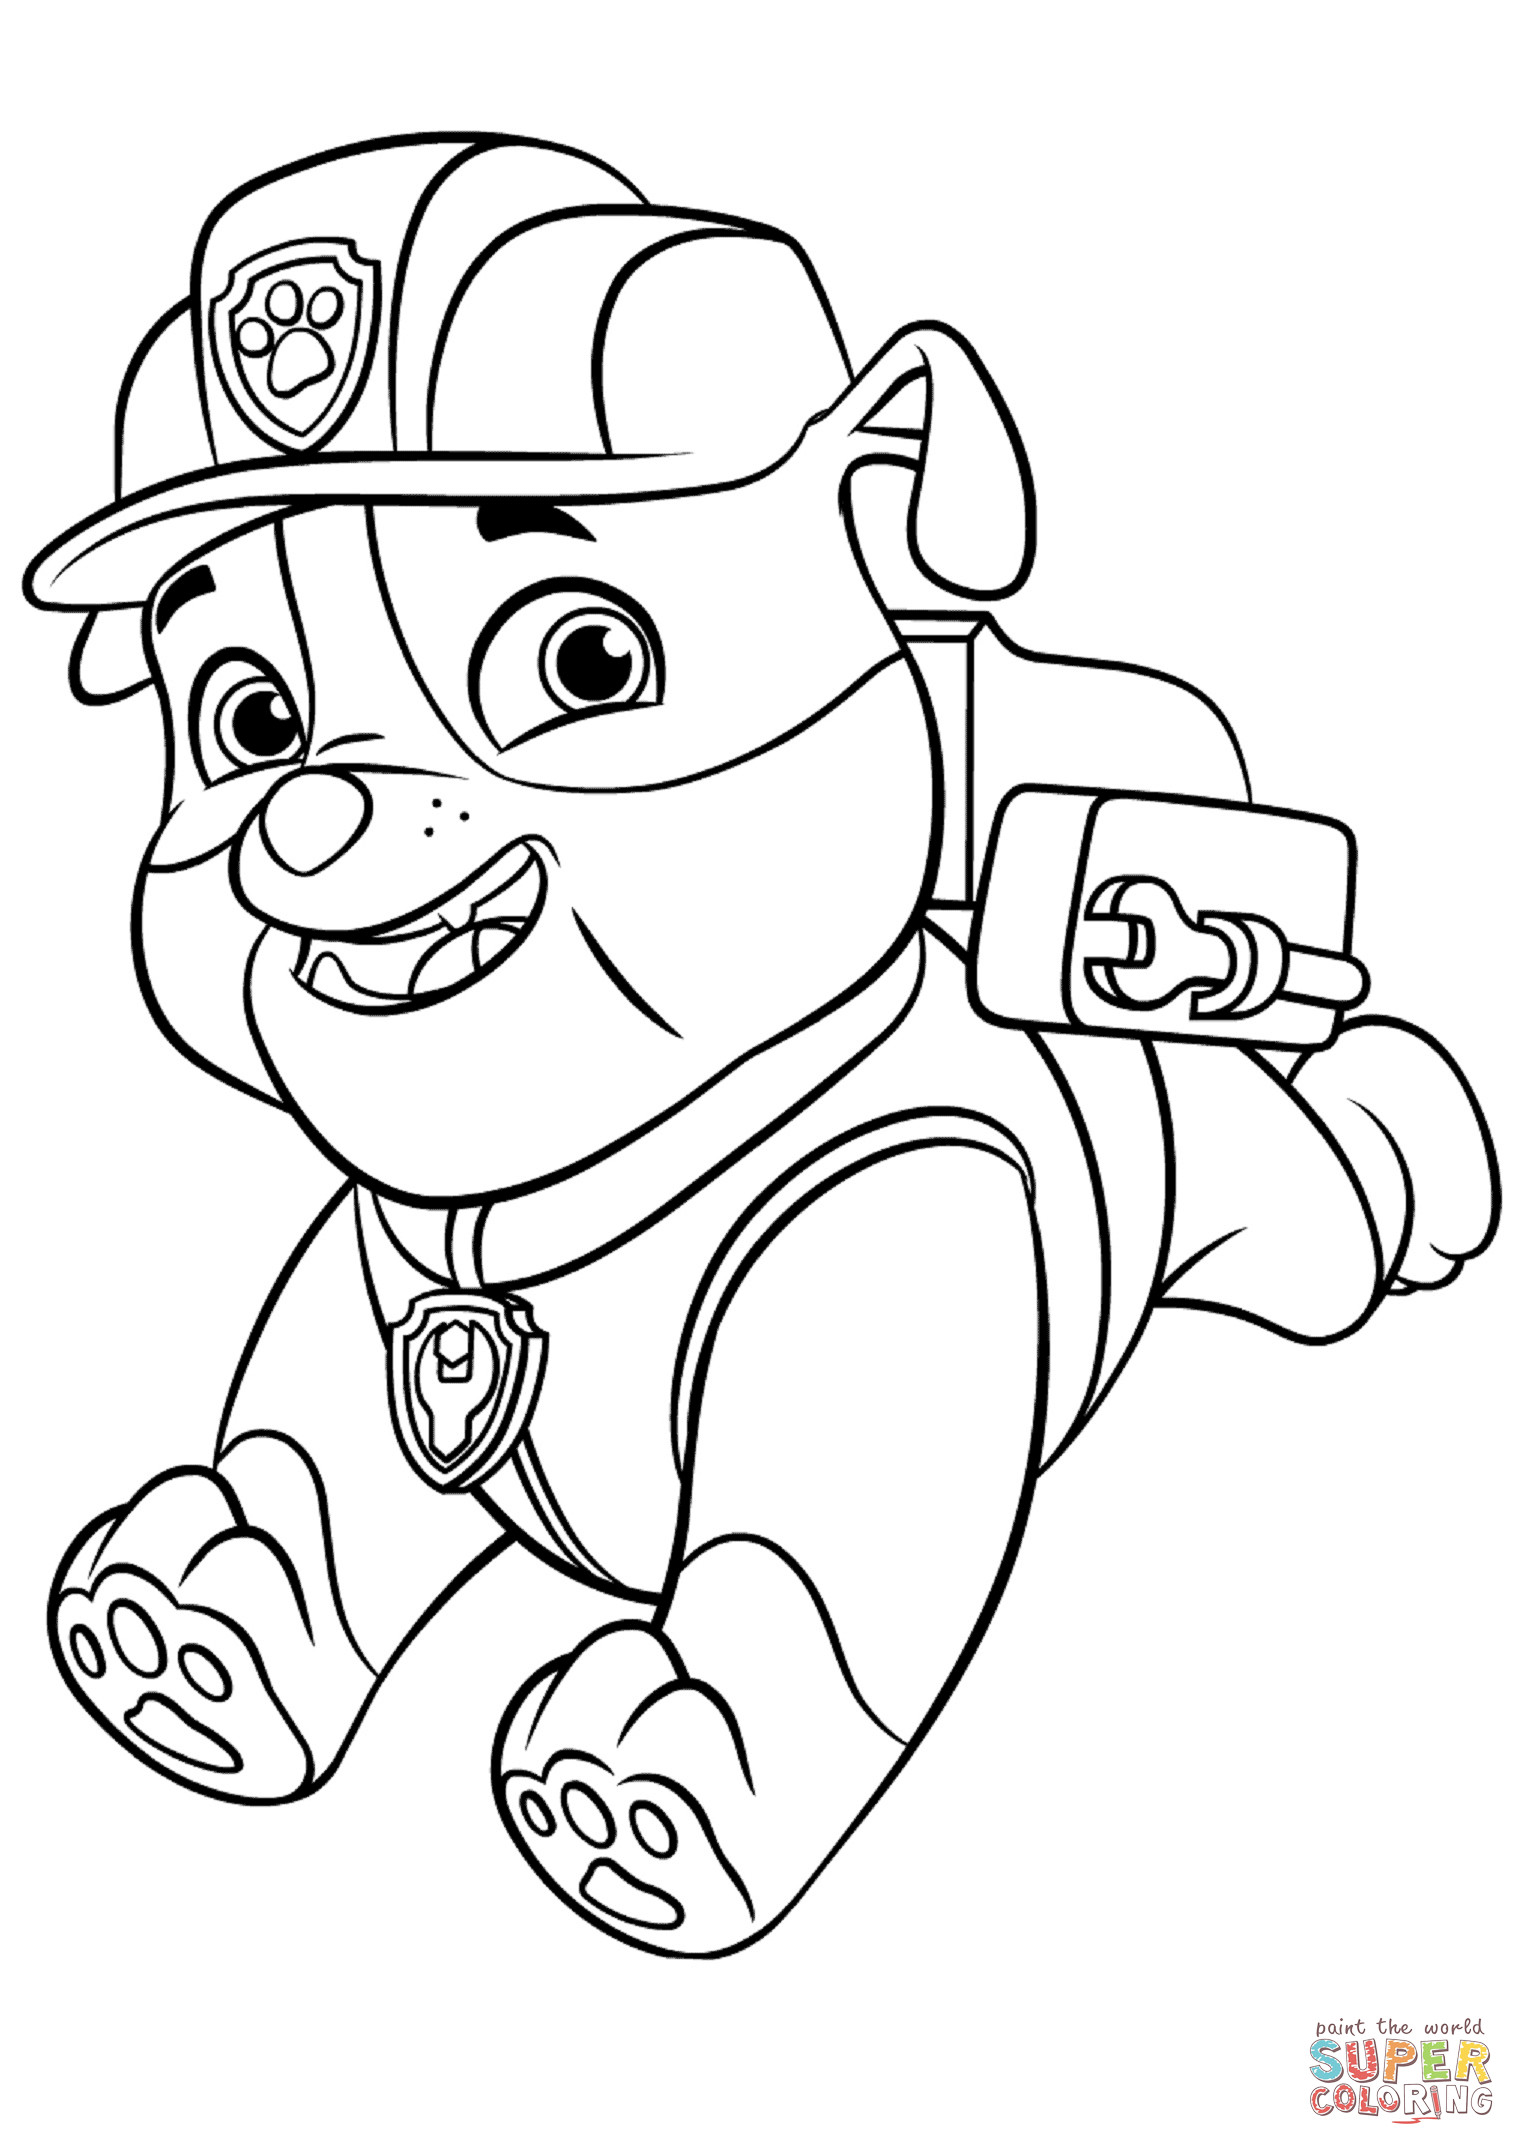 Coloring Pages Boys Paw Patrol
 Paw Patrol Rubble with Backpack